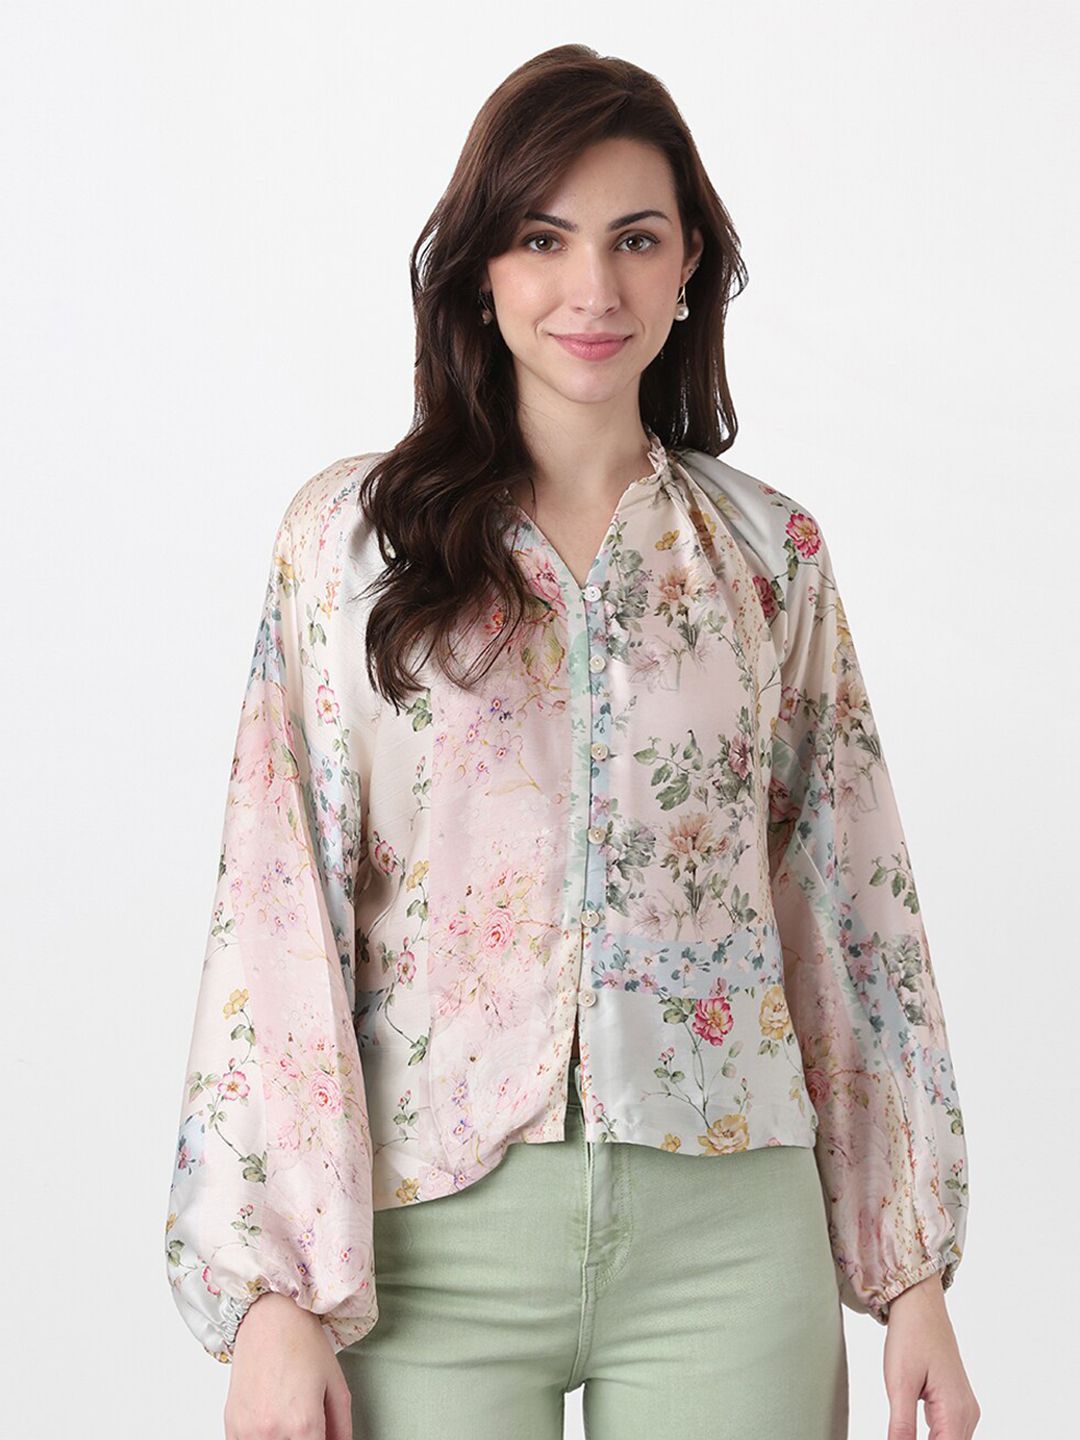 AND Multicoloured Floral Print Mandarin Collar Shirt Style Top Price in India